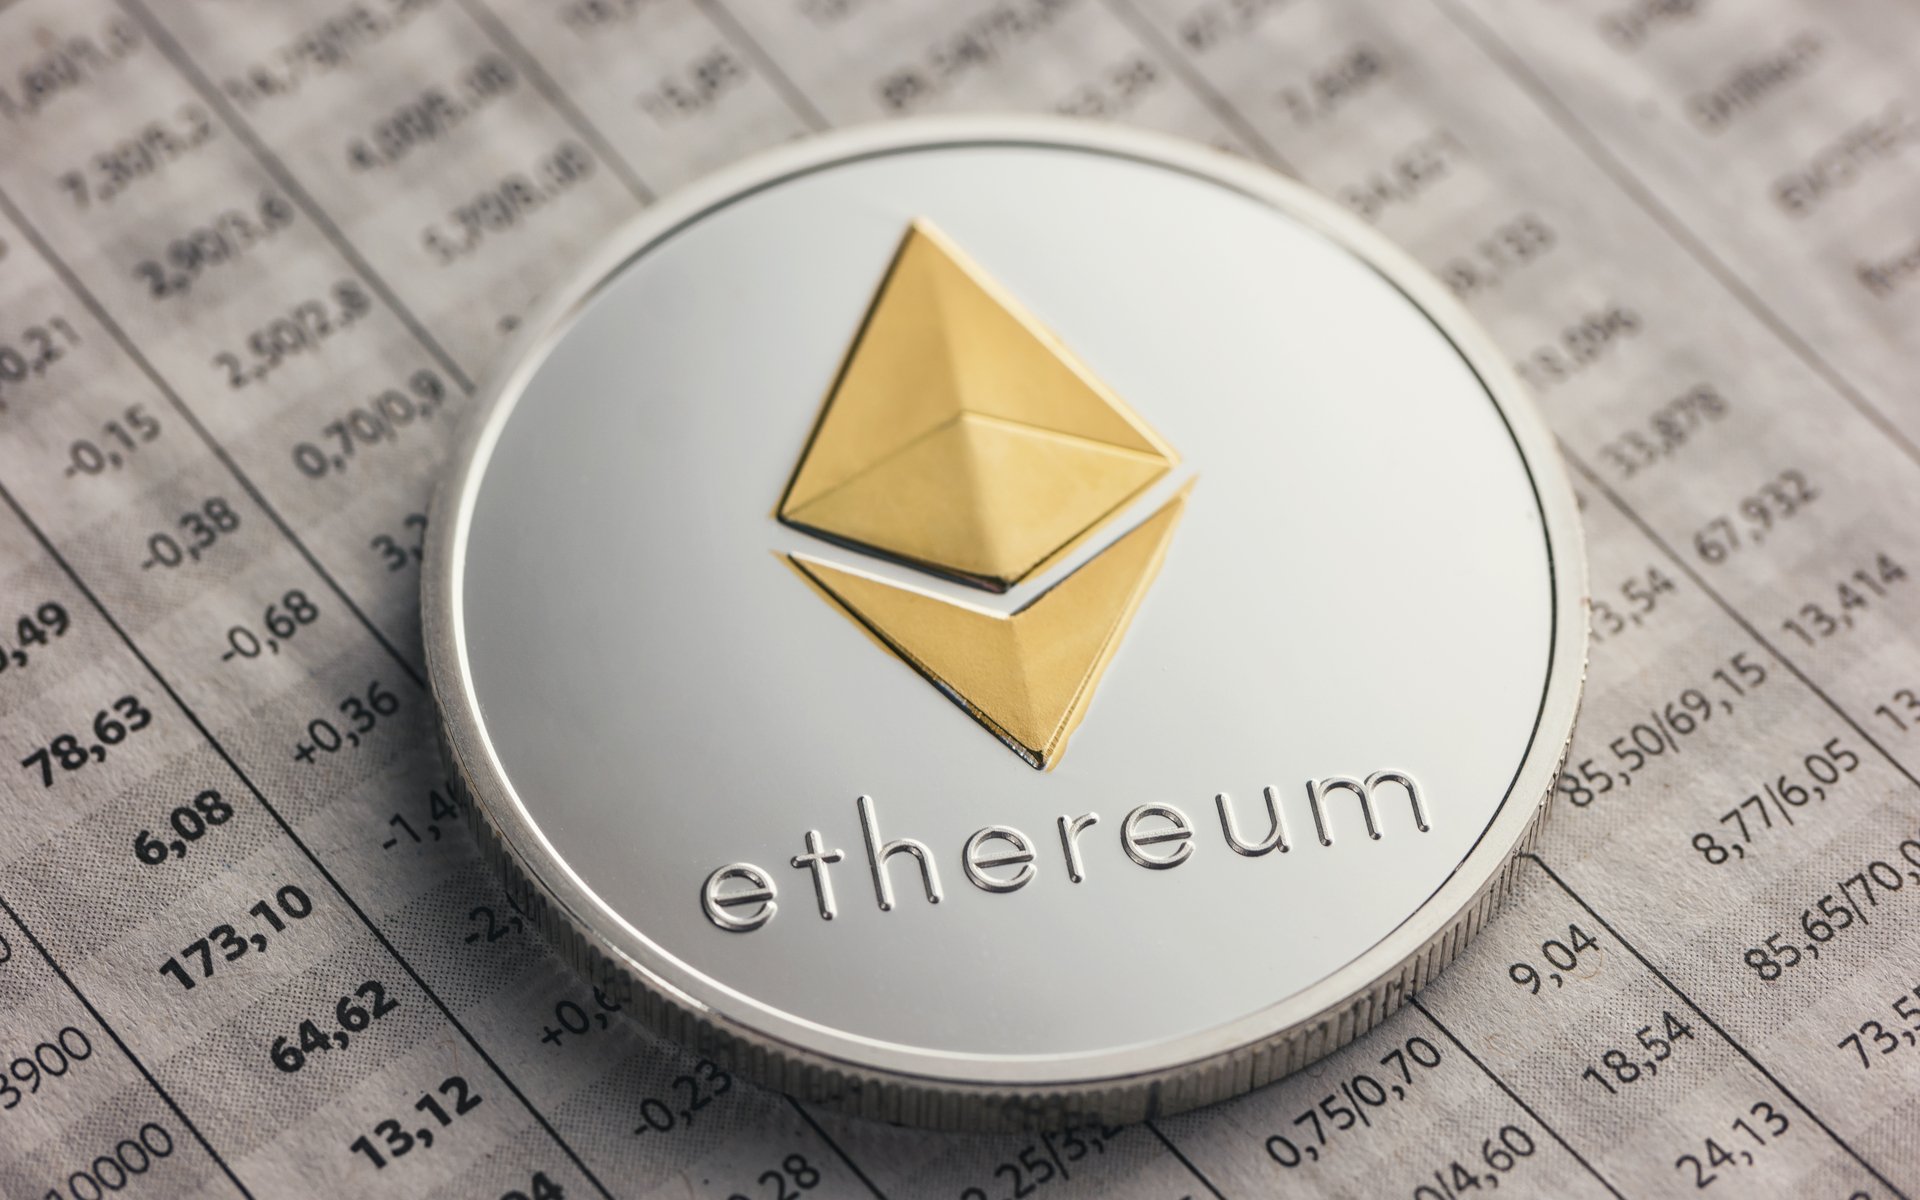 Ethereum rises above $ 2,100, setting a new all-time high